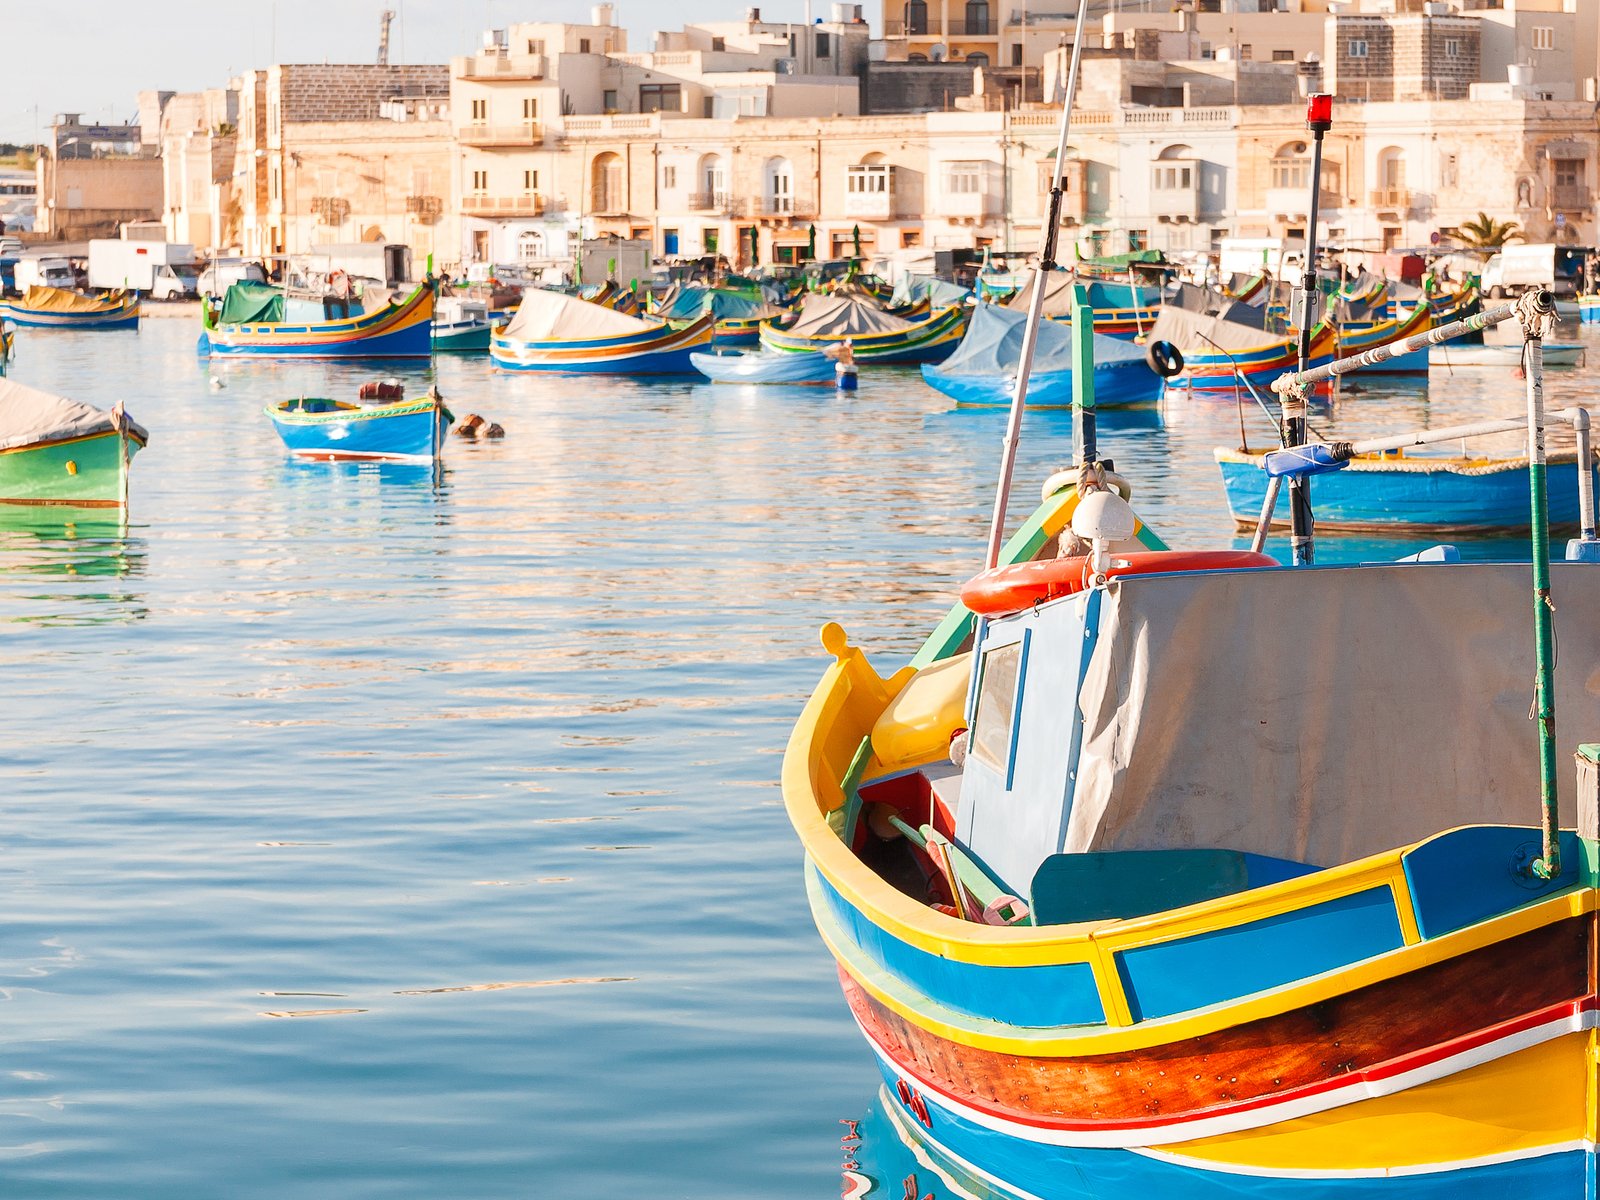 Malta Becomes the First EU Nation to Require Proof of Vaccination for Visitors